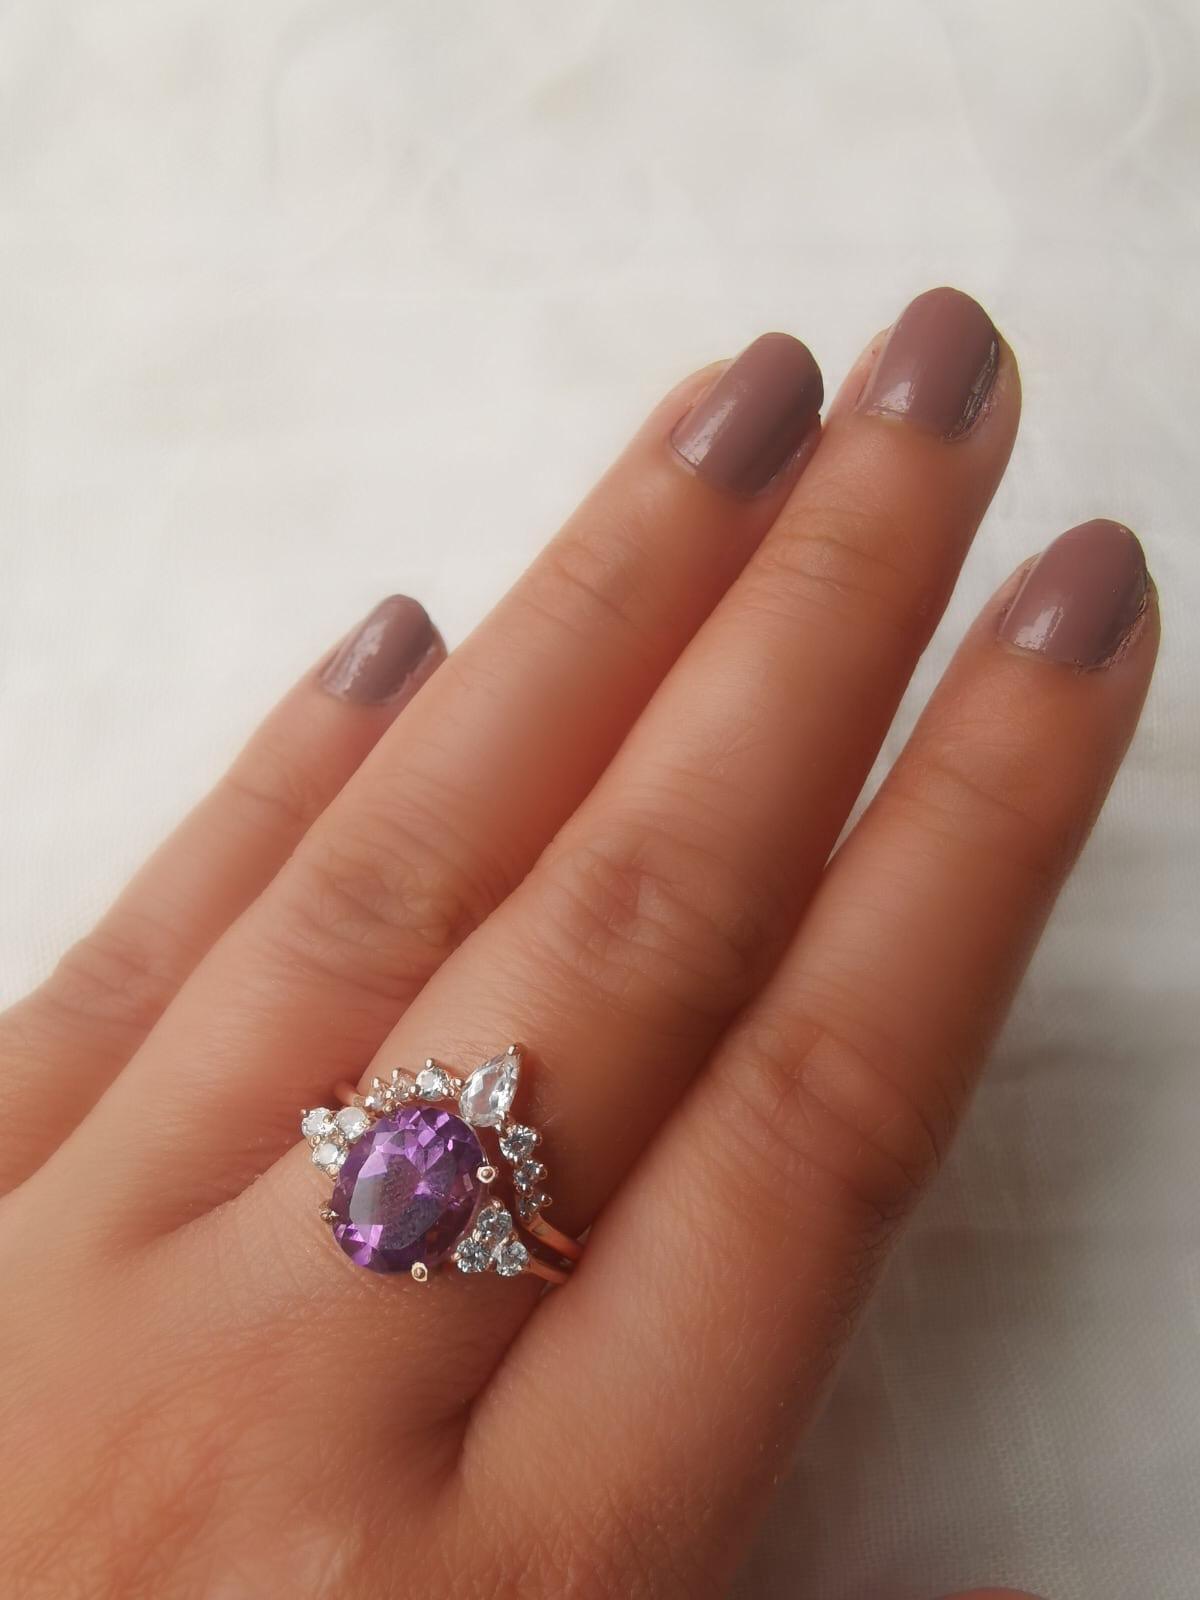 The Princess Ring/18k Rose Gold Vermeil Amethyst & White Topaz - infinityXinfinity.co.uk